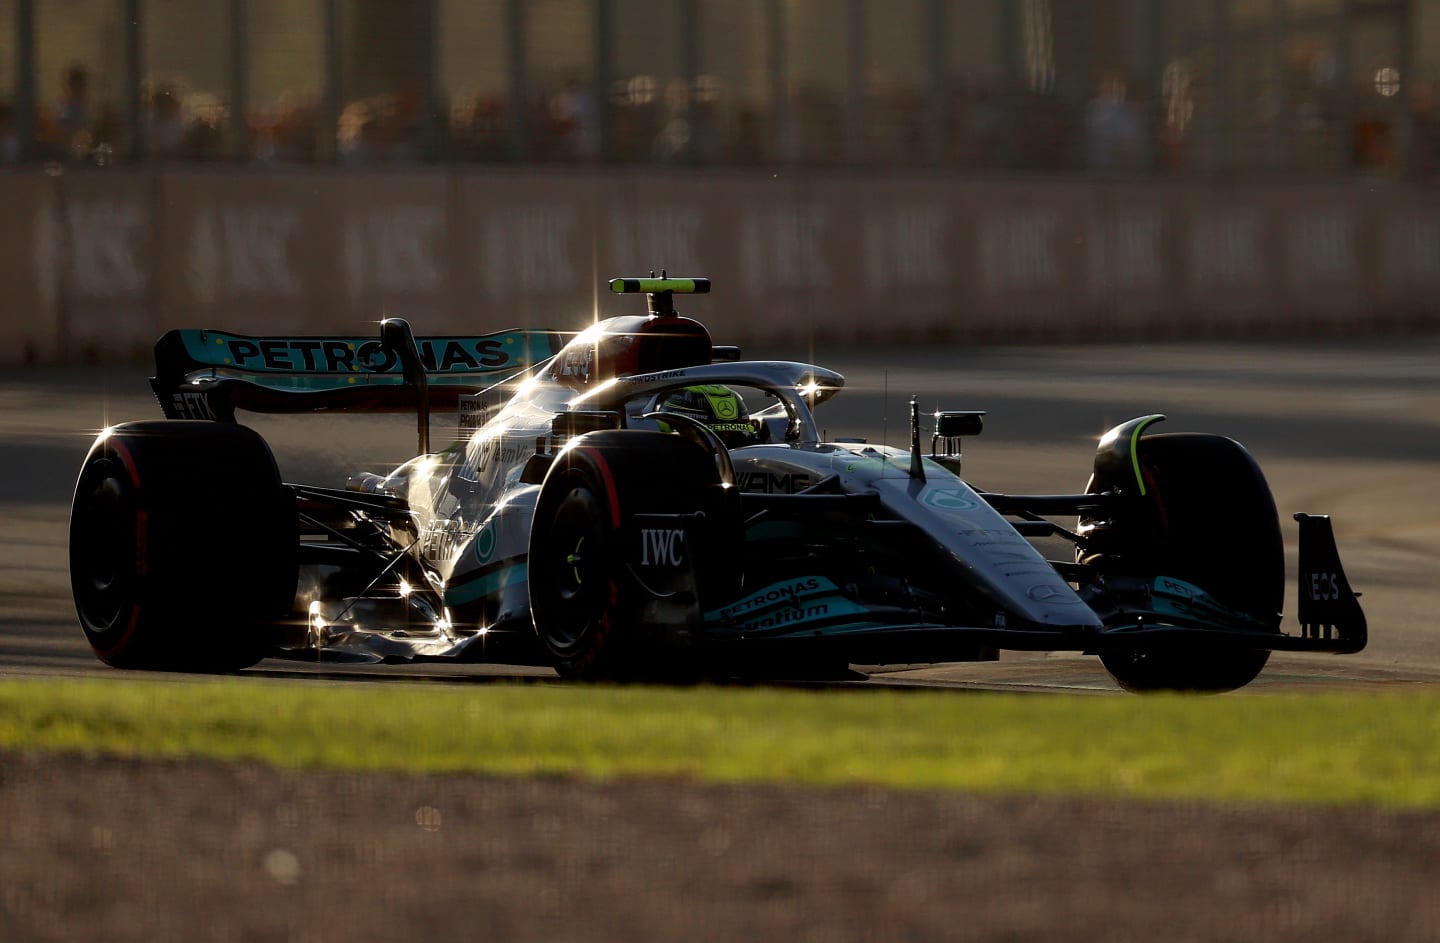 MELBOURNE, AUSTRALIA - APRIL 09: Lewis Hamilton of Great Britain driving the (44) Mercedes AMG Petronas F1 Team W13 on track during qualifying ahead of the F1 Grand Prix of Australia at Melbourne Grand Prix Circuit on April 09, 2022 in Melbourne, Australia. (Photo by Robert Cianflone/Getty Images)